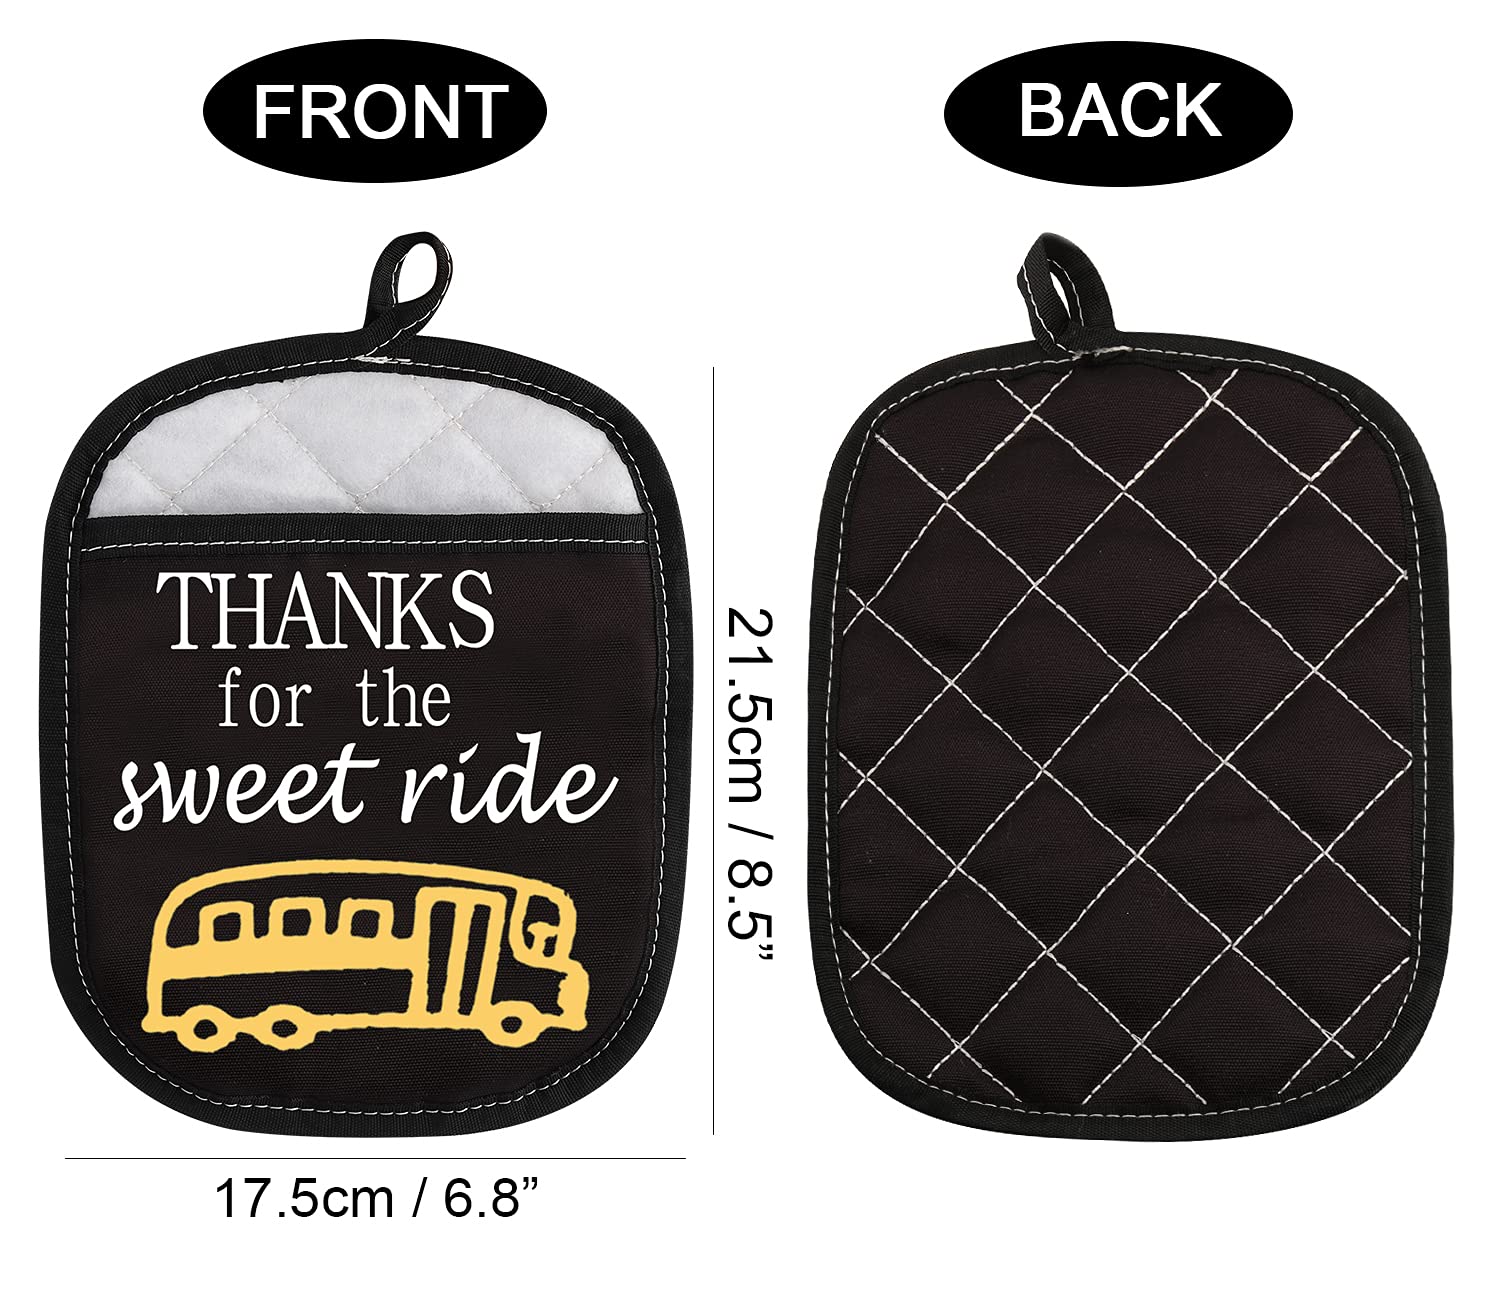 WCGXKO Oven Pads Pot Holder with Pocket for School Bus Driver Thanks for The Sweet Ride (Sweet Ride)